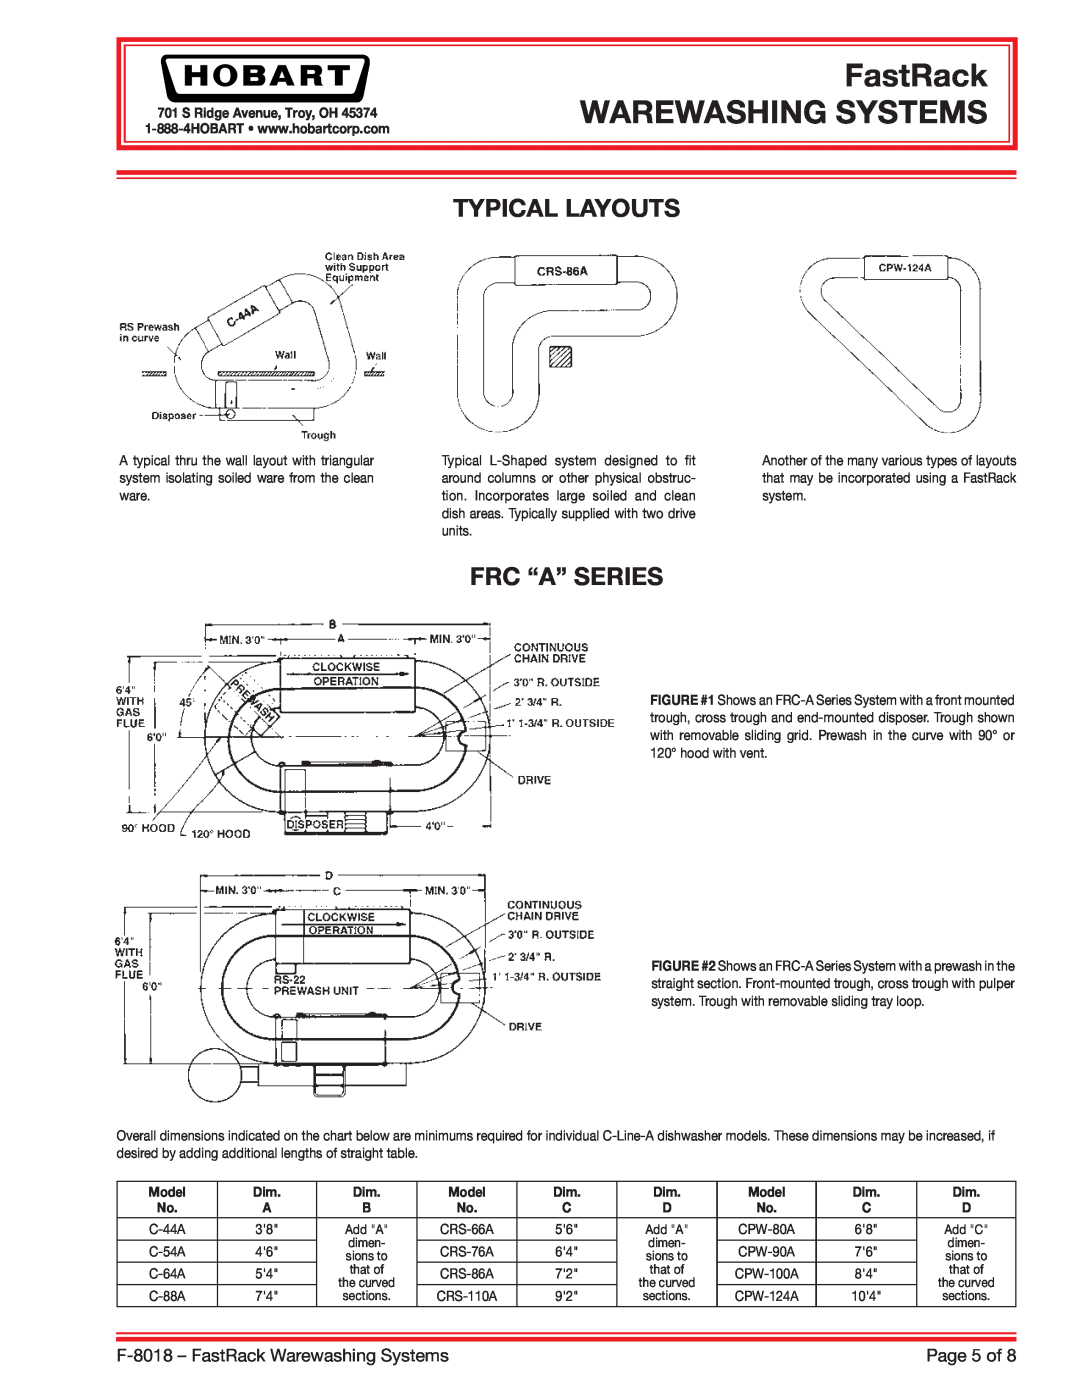 Hobart F-8018 specifications Typical Layouts, Frc “A” Series, FastRack WAREWASHING SYSTEMS, S Ridge Avenue, Troy, OH, Model 